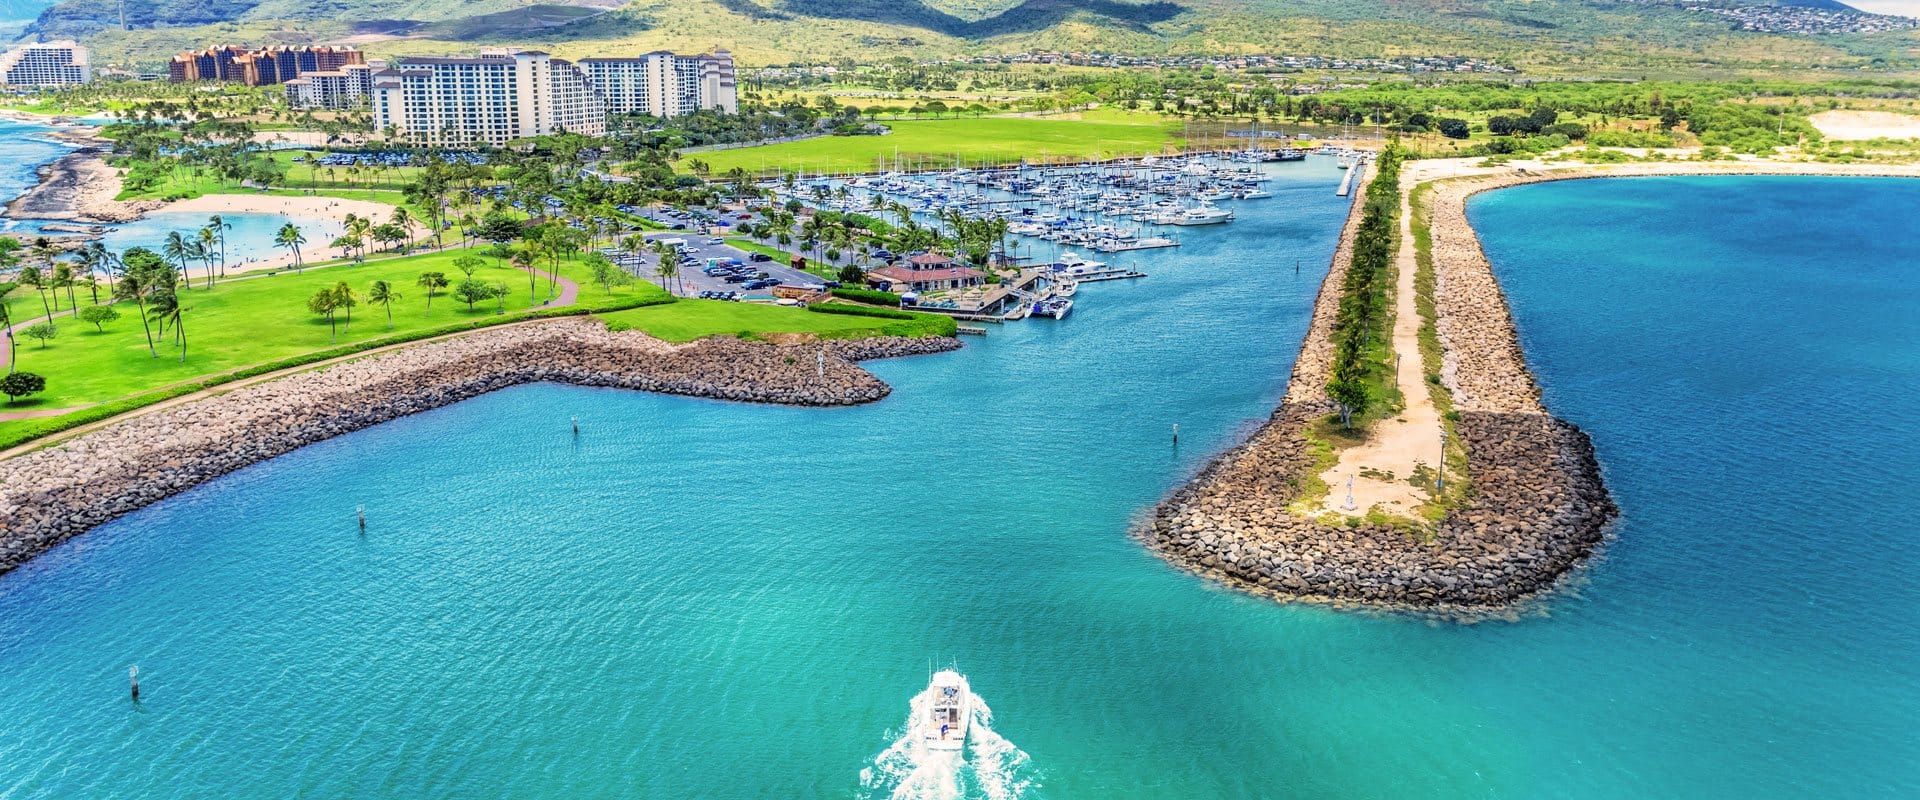 Departs daily from picturesque Ko Olina Marina